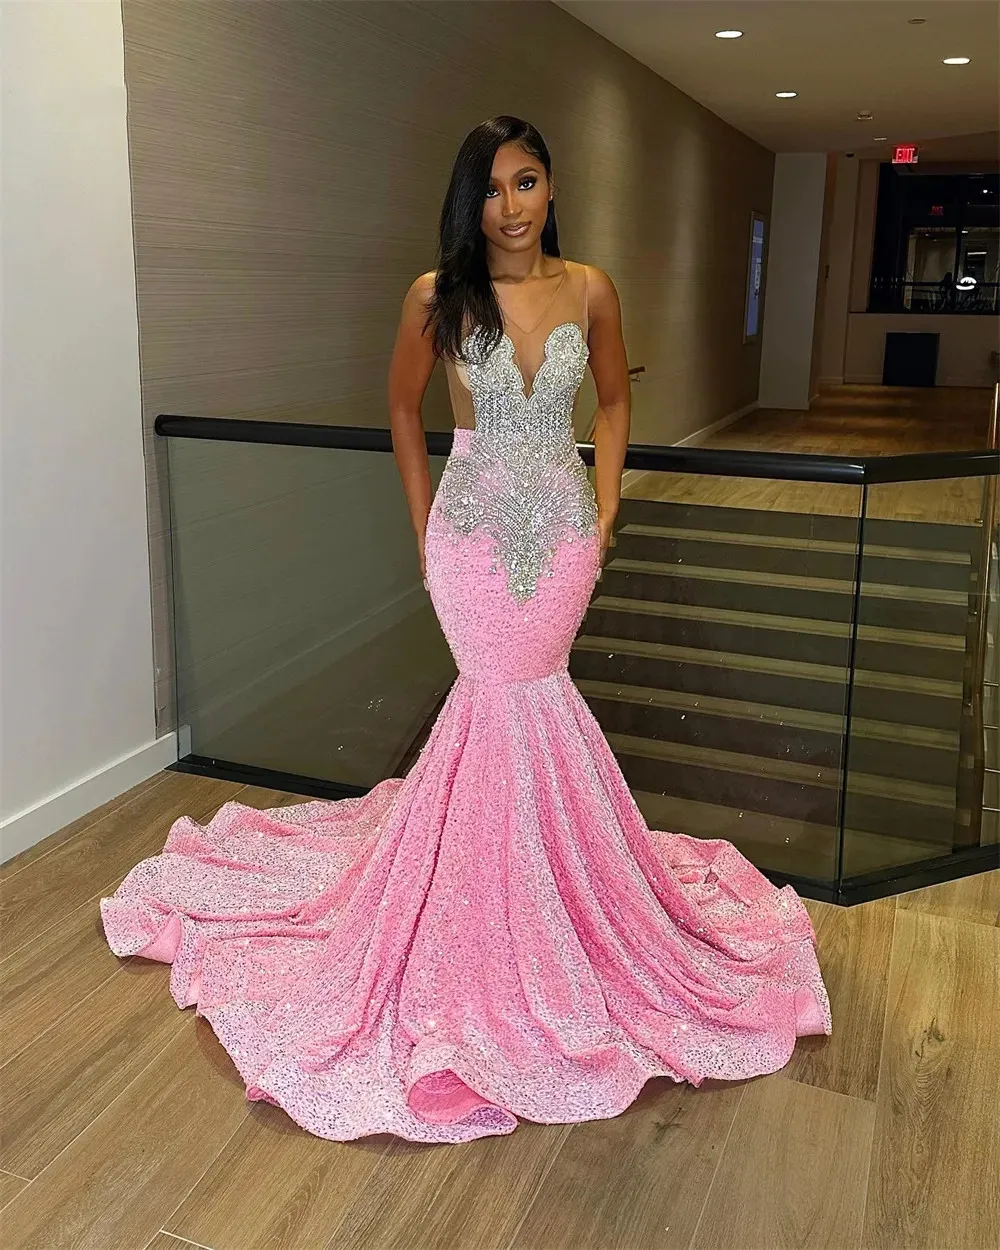 Sparkling Pink Sequin Mermaid Pink Sparkly Prom Dress With Silver Beaded V  Neckline For Black Girls Perfect For Evening Parties 2023 Collection From  Sunnybridal01, $147.68